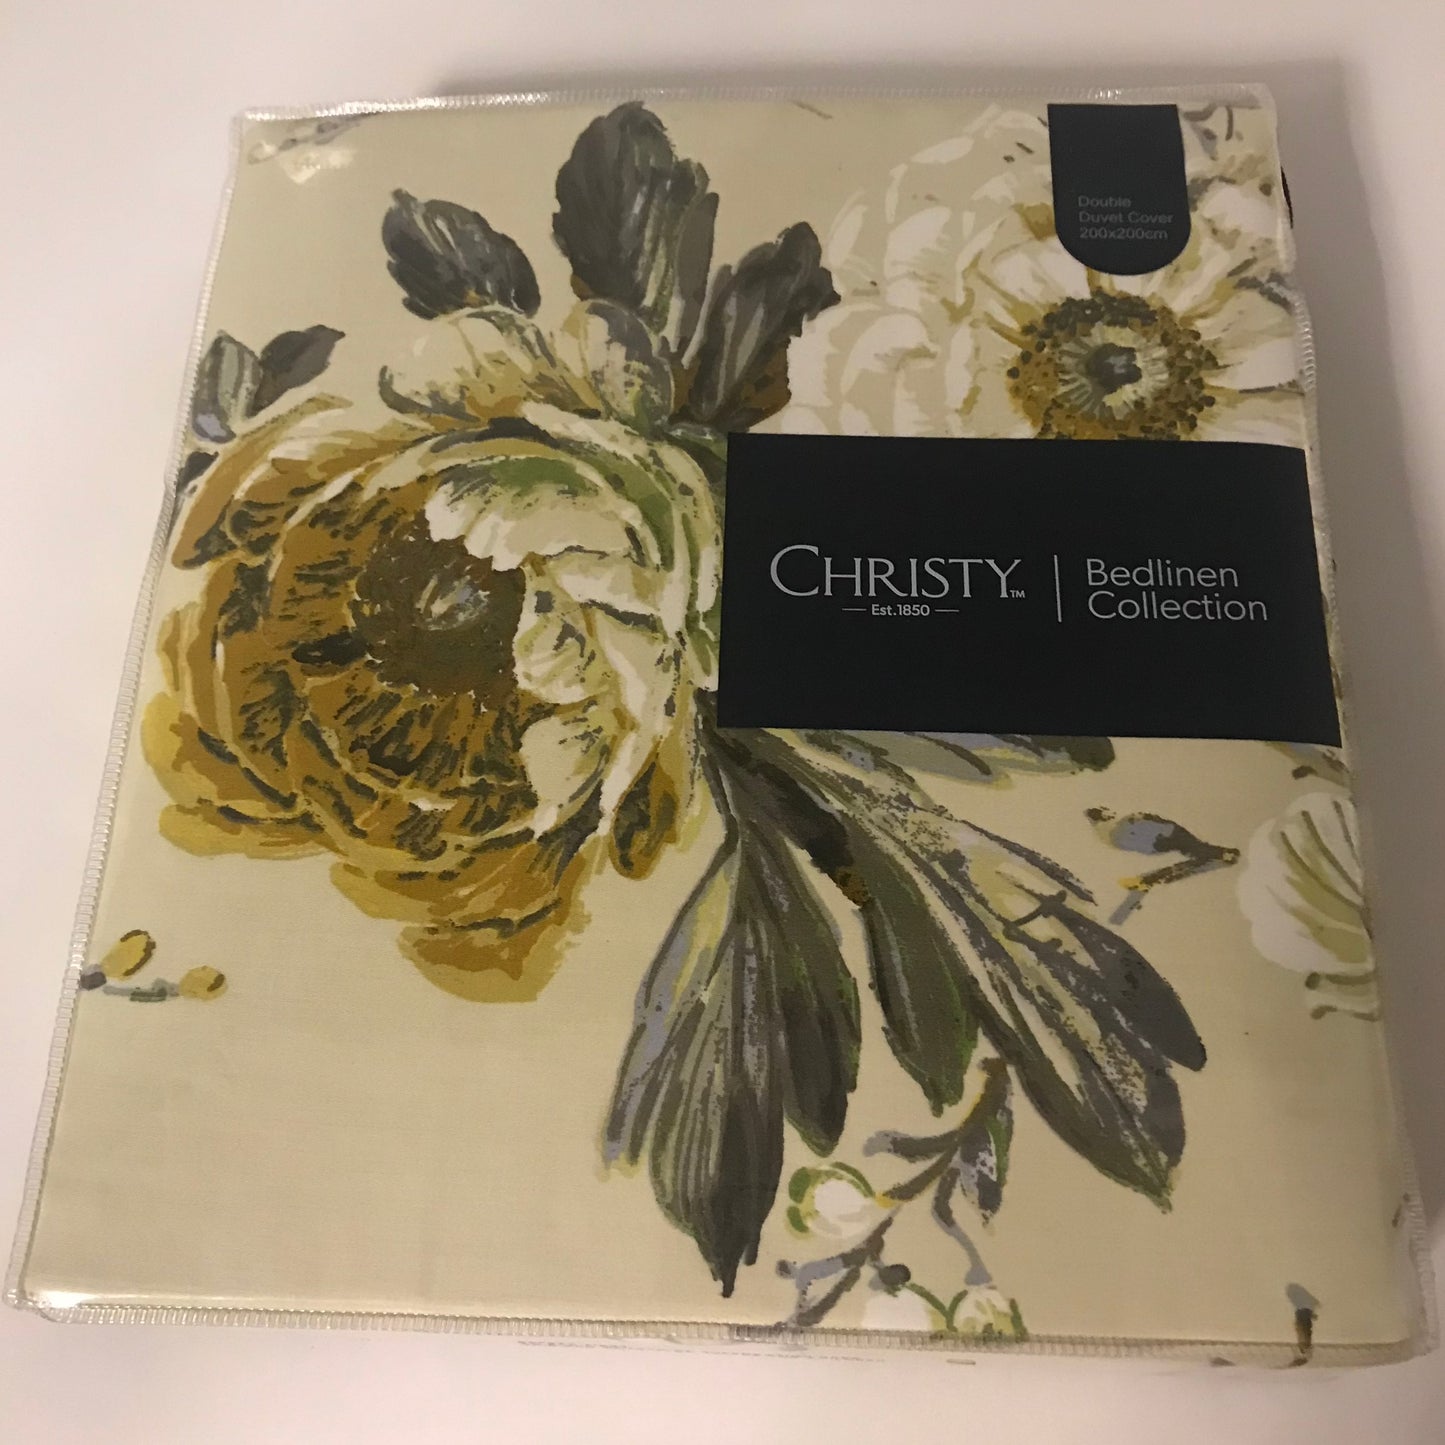 Orchid Duvet Cover and Pillowcases by Christy